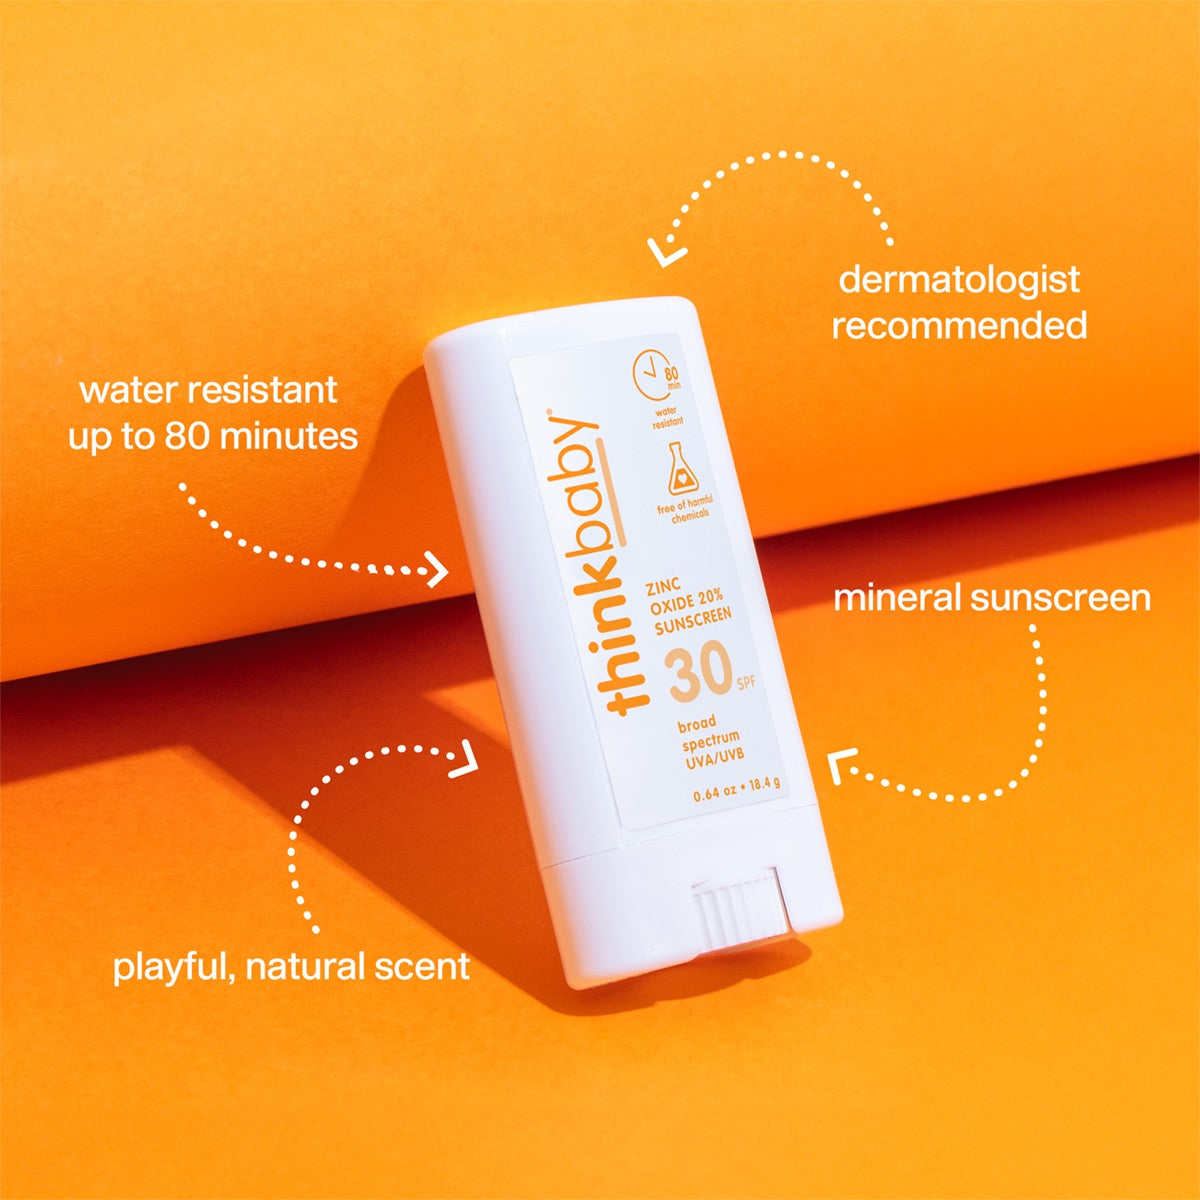 Flat lay image of Thinkbaby sunscreen stick with annotations for key features like dermatologist recommendation, mineral sunscreen, and a playful, natural scent.